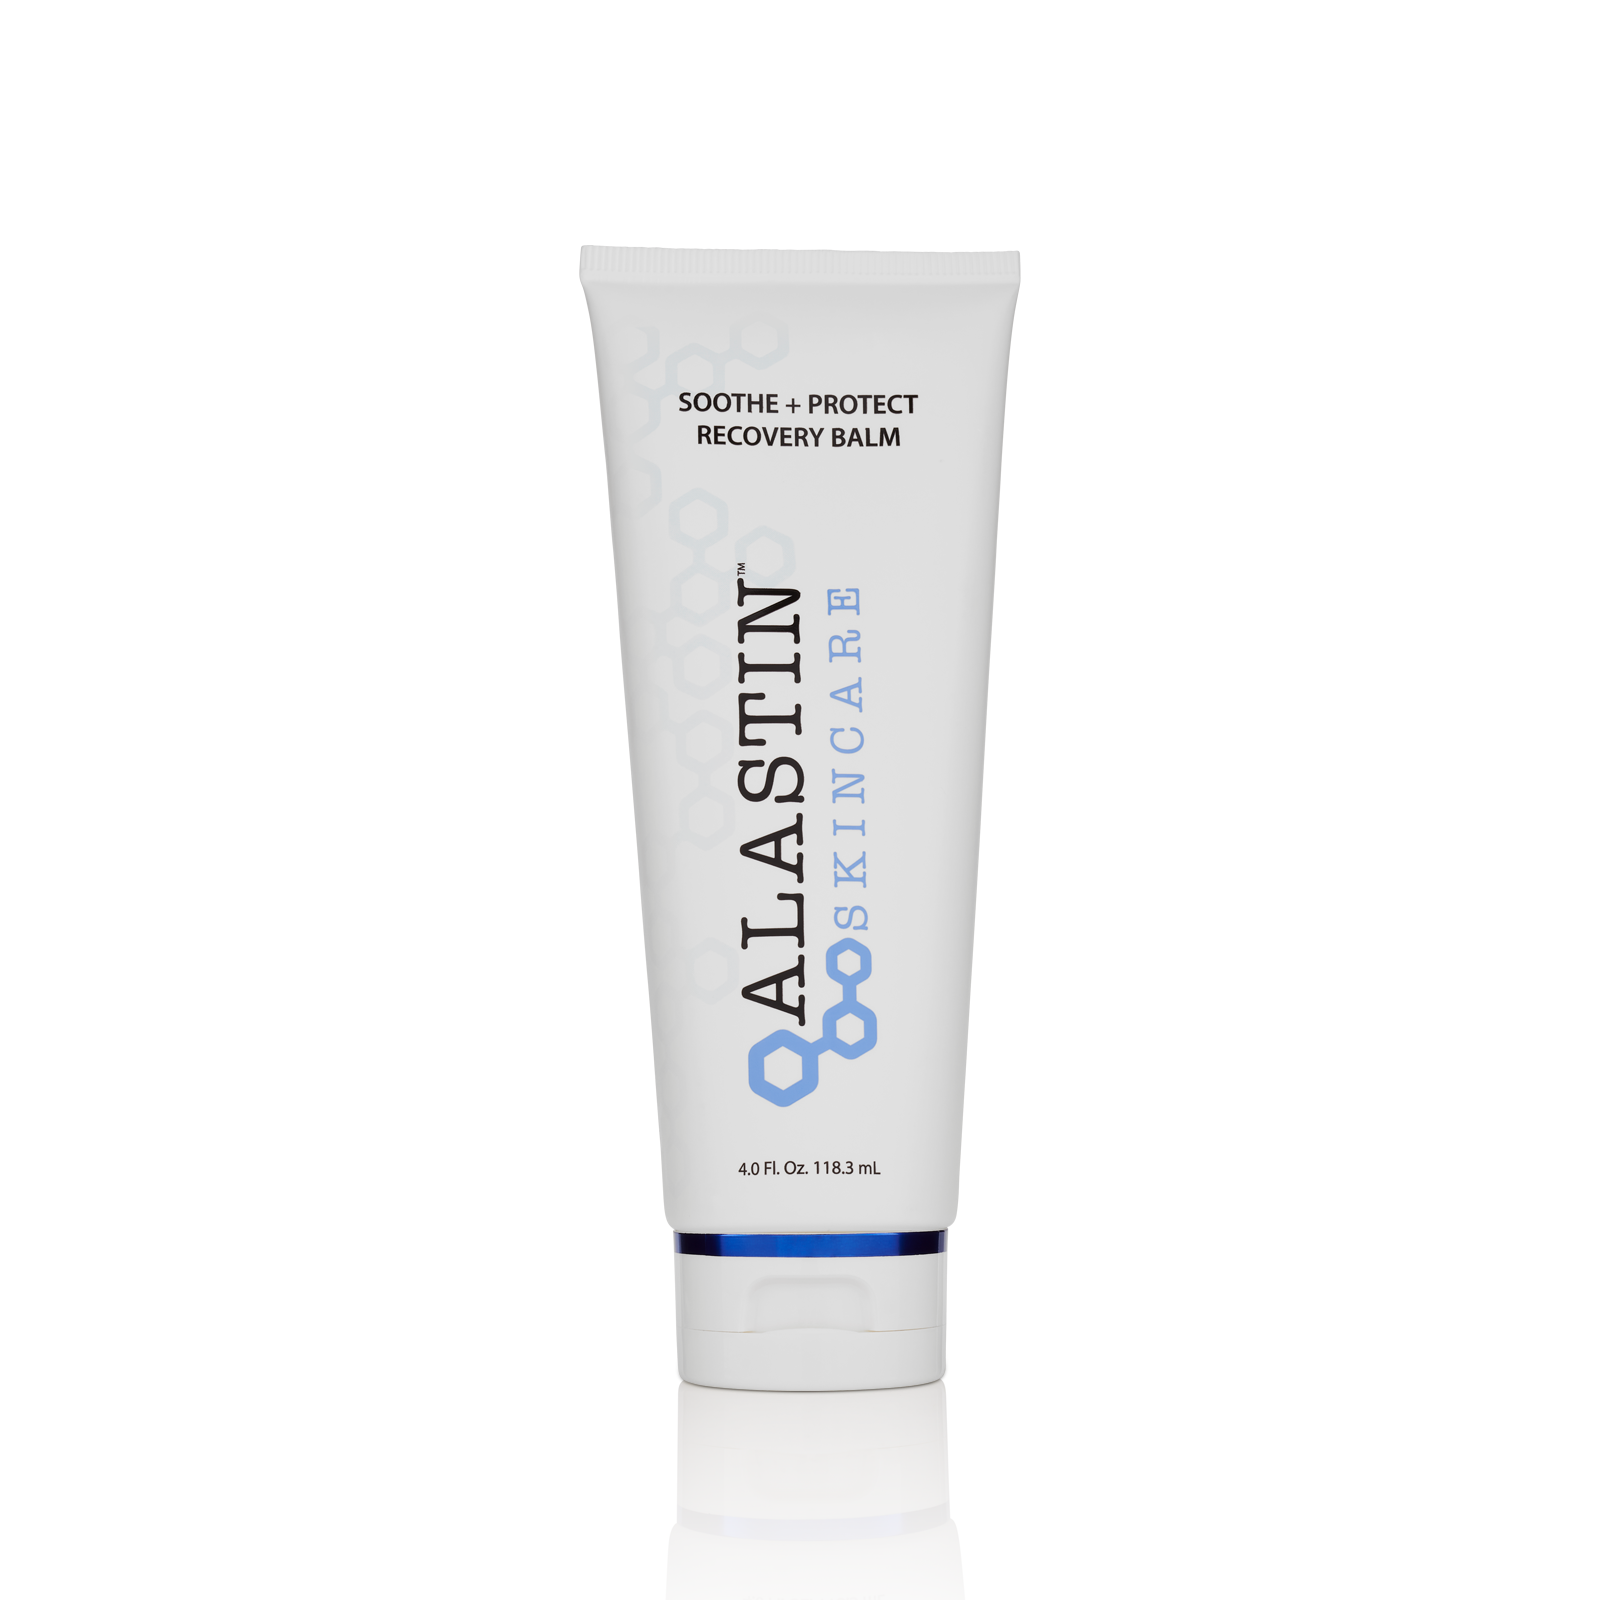 Soothe + Protect Recovery Balm | ALASTIN Skincare®